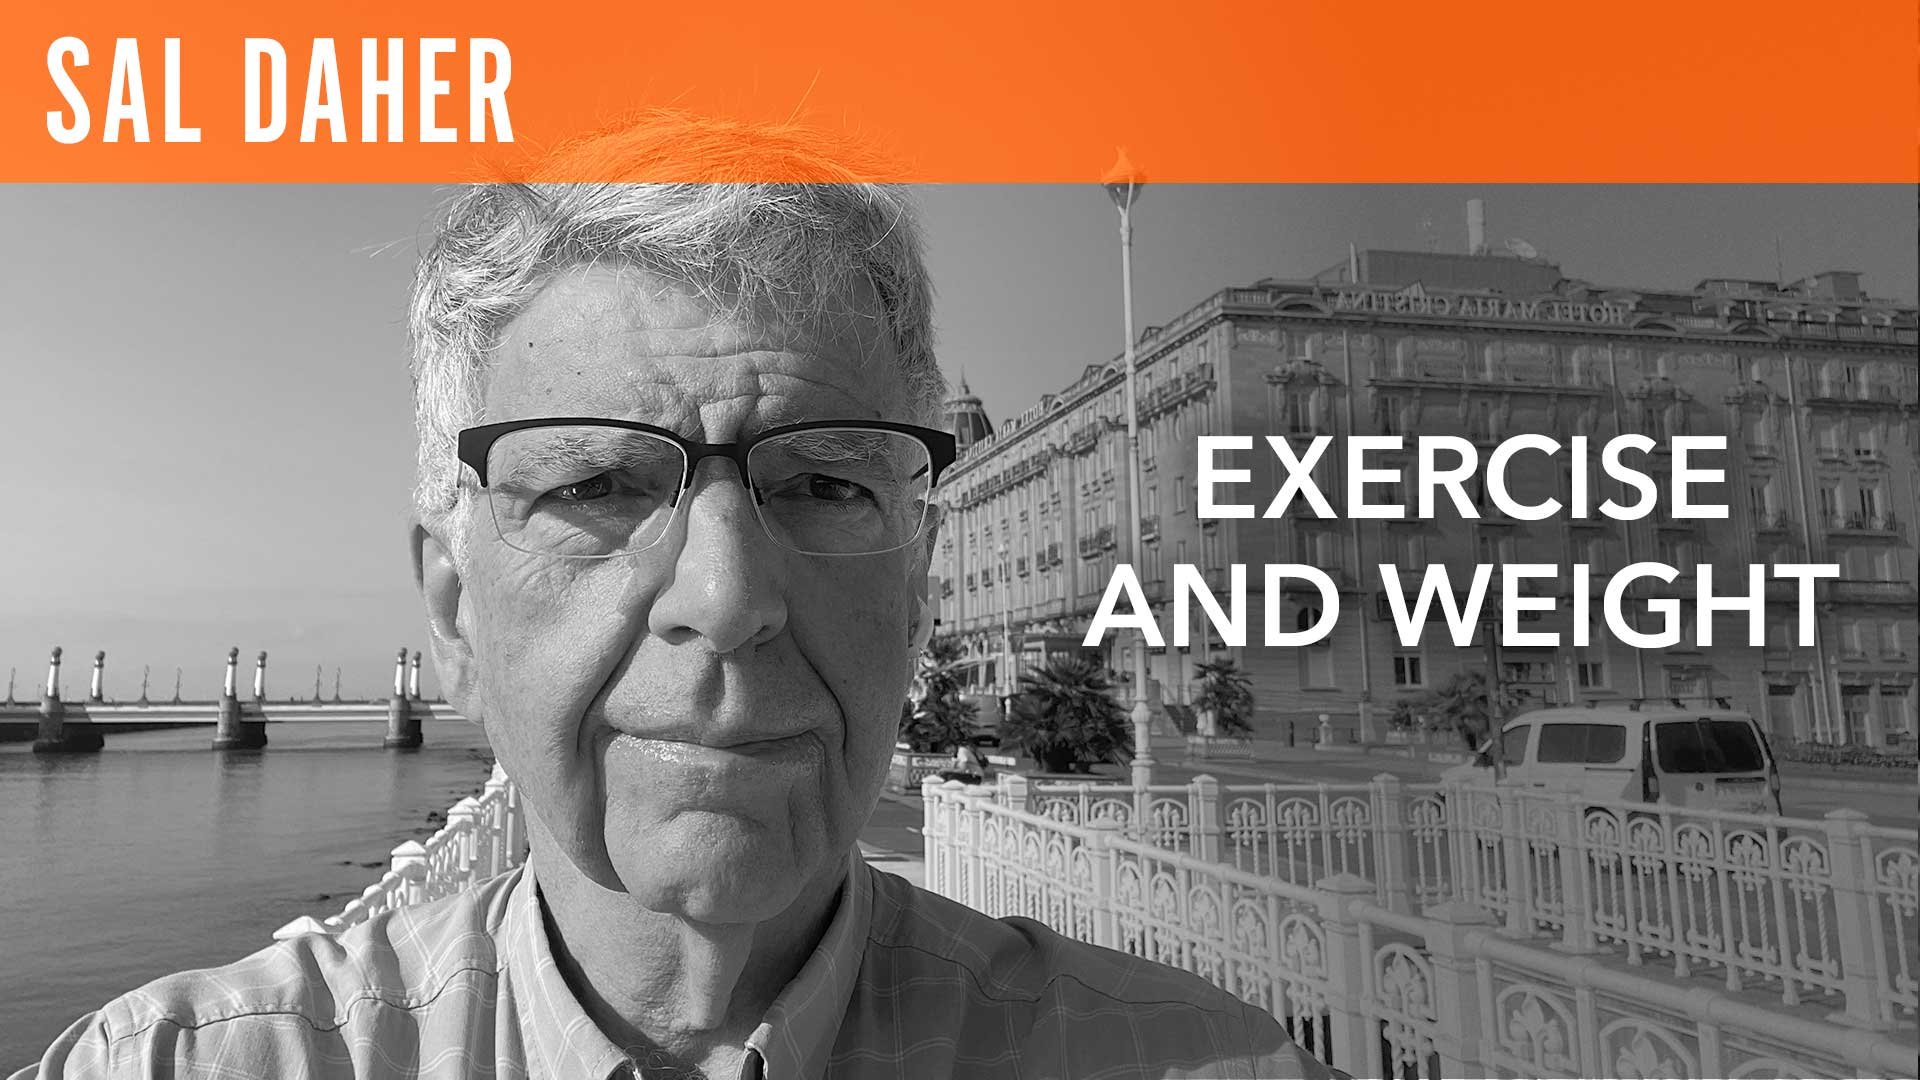 Sal Daher, "Exercise and Weight" 